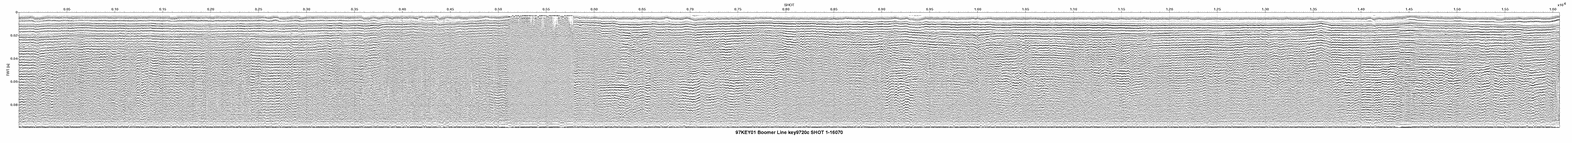 Thumbnail GIF image of the seismic trackline key9720c, with a hotlink to the more detailed, larger JPG image.